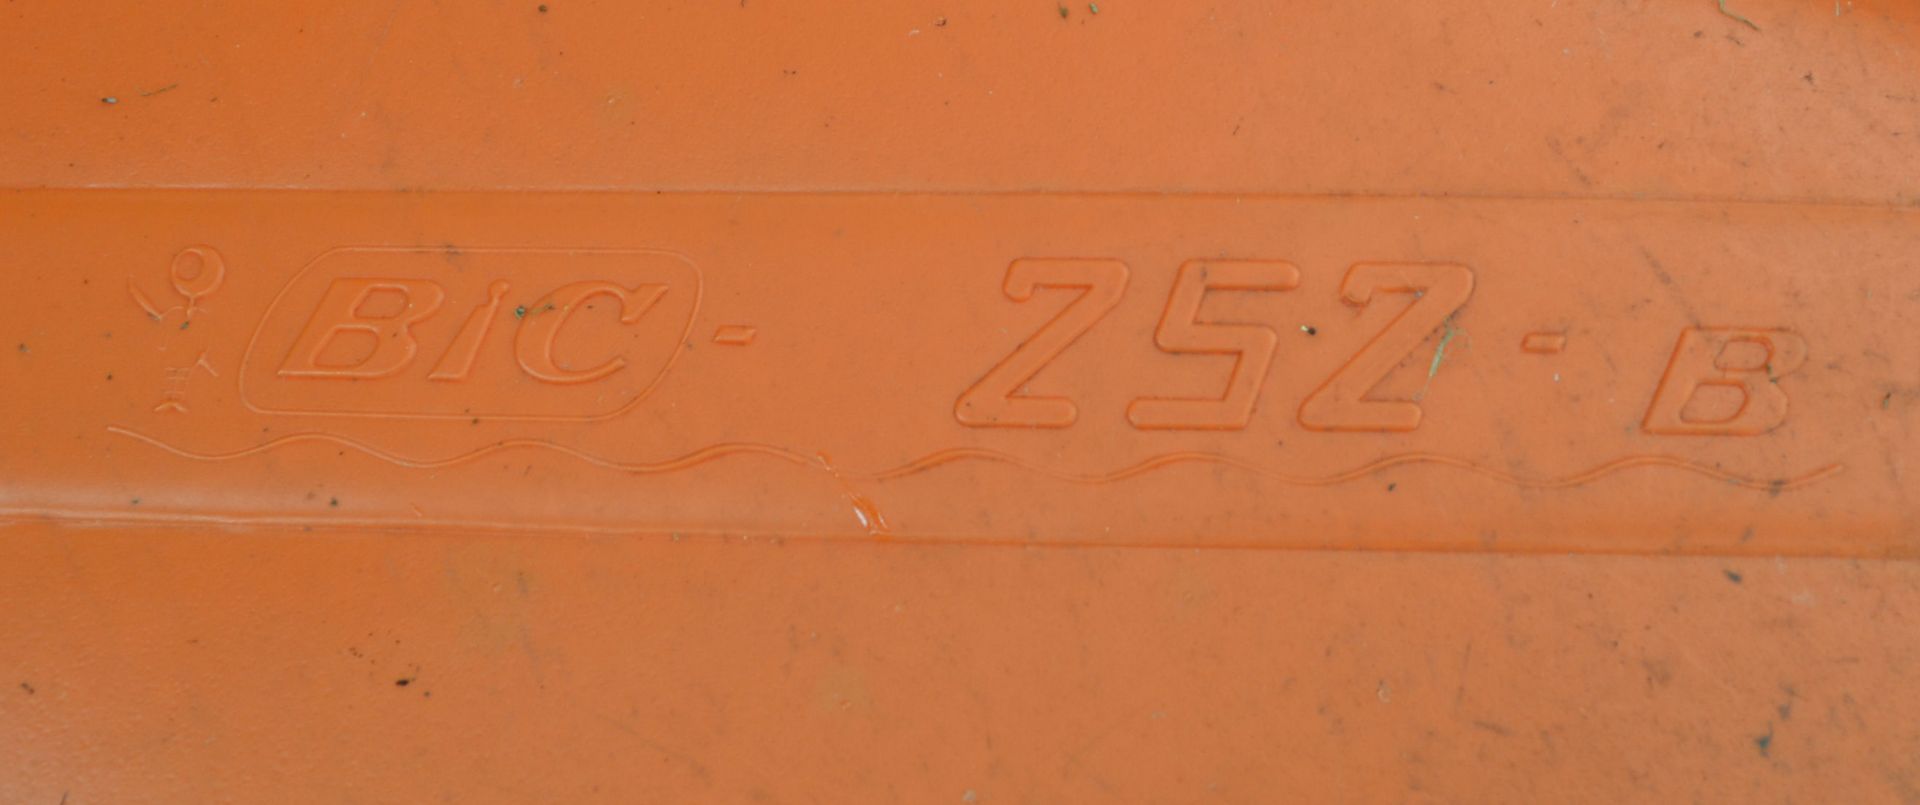 1 x Bic Z5Z-B Boat/Dinghy - CL226 - Location: Knutsford WA16 - NO VAT ON THE HAMMER Measurements: - Image 4 of 14